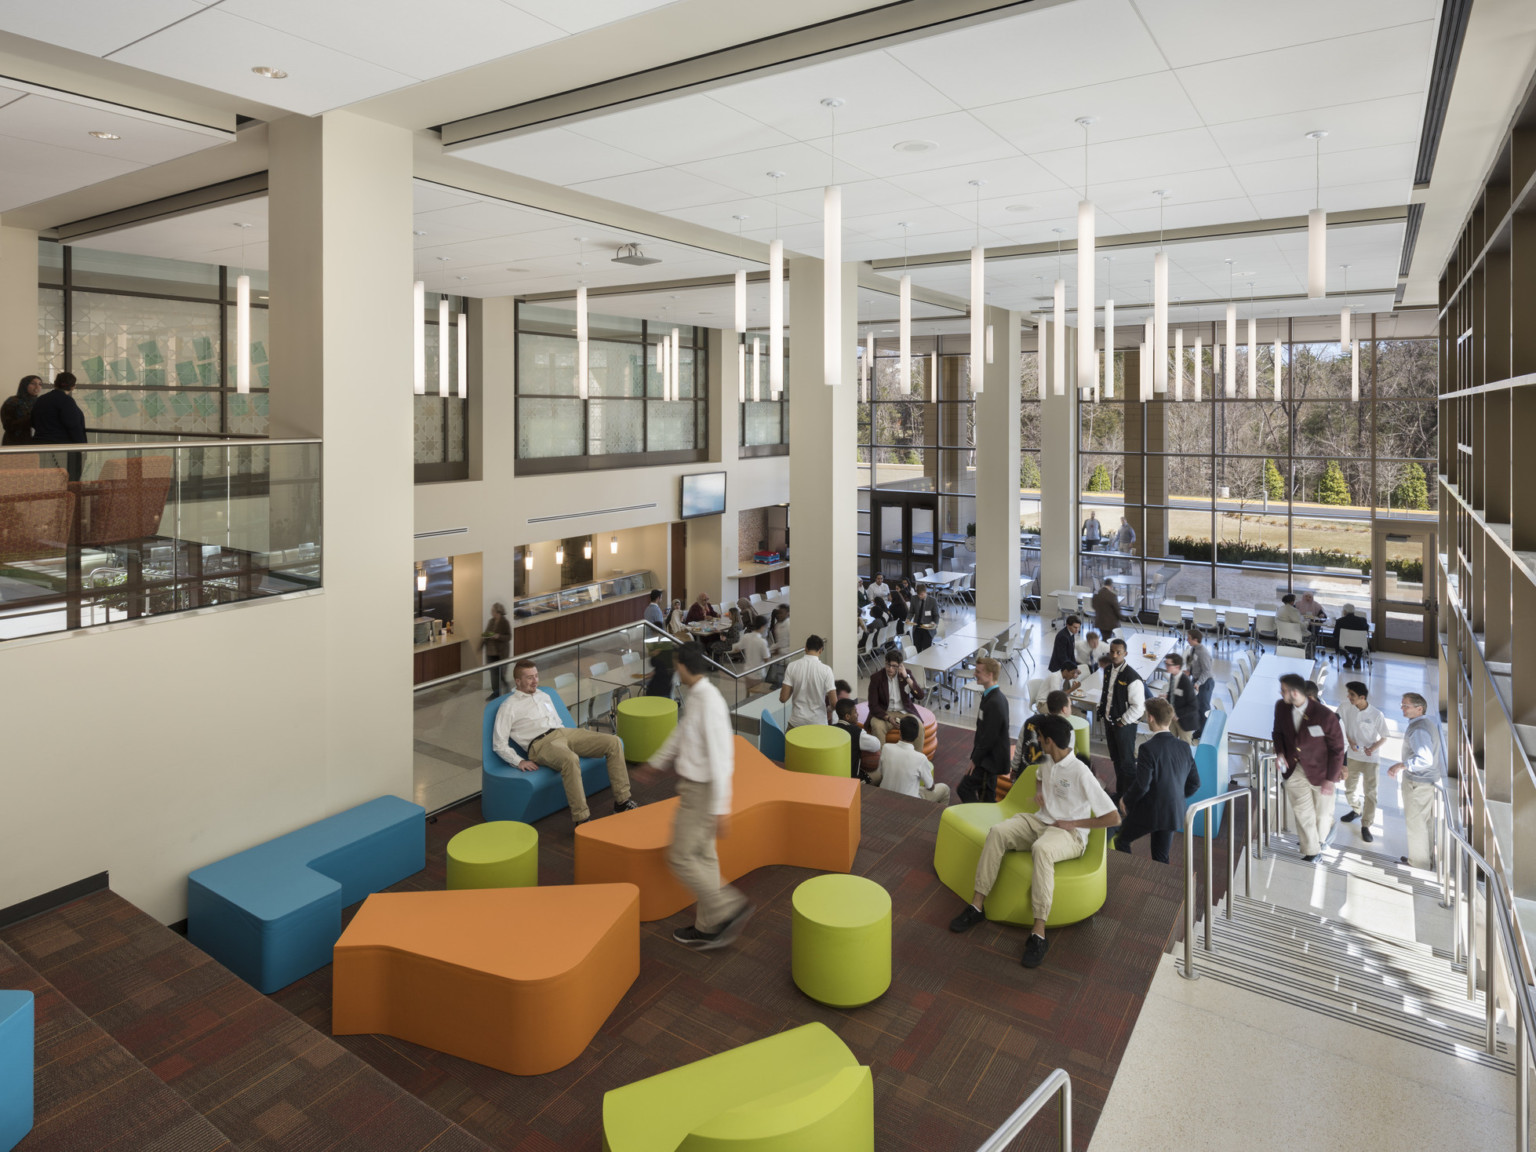 learning stair at a school with colorful, flexible seating, two-story floor to ceiling windows, and a lunchroom at the base of the stairs